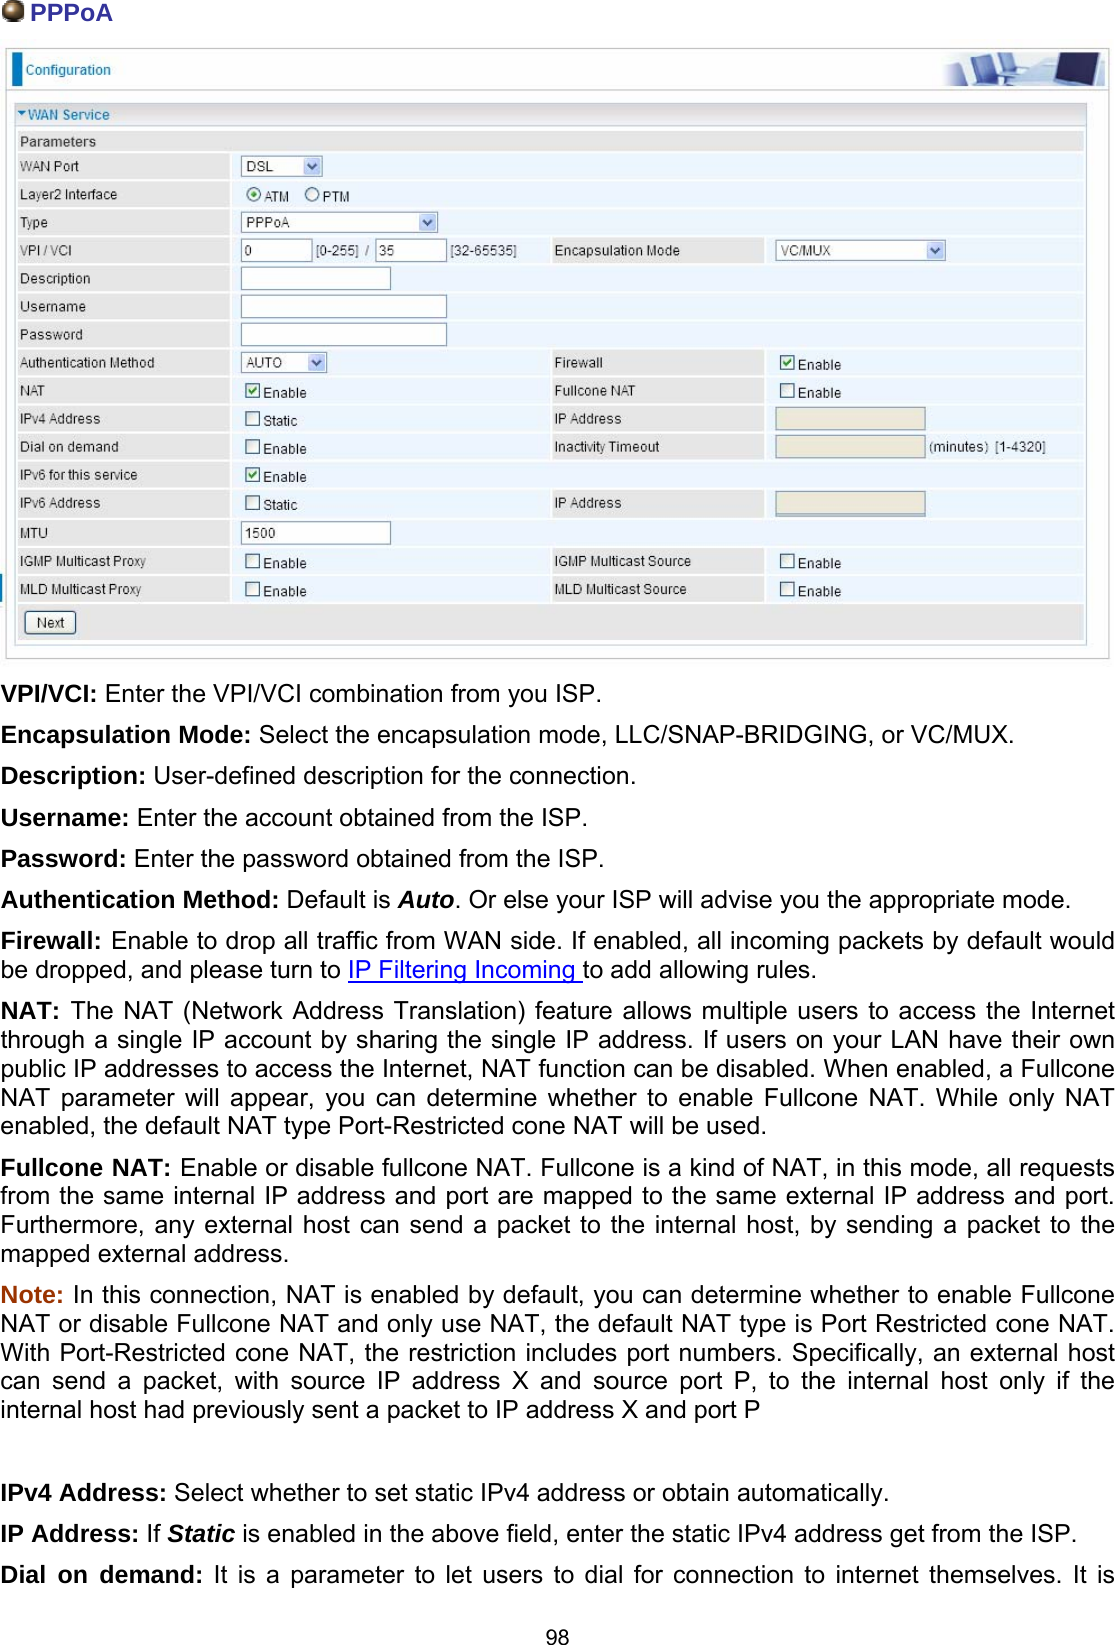  98  PPPoA  VPI/VCI: Enter the VPI/VCI combination from you ISP.  Encapsulation Mode: Select the encapsulation mode, LLC/SNAP-BRIDGING, or VC/MUX. Description: User-defined description for the connection. Username: Enter the account obtained from the ISP.  Password: Enter the password obtained from the ISP. Authentication Method: Default is Auto. Or else your ISP will advise you the appropriate mode. Firewall: Enable to drop all traffic from WAN side. If enabled, all incoming packets by default would be dropped, and please turn to IP Filtering Incoming to add allowing rules. NAT: The NAT (Network Address Translation) feature allows multiple users to access the Internet through a single IP account by sharing the single IP address. If users on your LAN have their own public IP addresses to access the Internet, NAT function can be disabled. When enabled, a Fullcone NAT parameter will appear, you can determine whether to enable Fullcone NAT. While only NAT enabled, the default NAT type Port-Restricted cone NAT will be used.  Fullcone NAT: Enable or disable fullcone NAT. Fullcone is a kind of NAT, in this mode, all requests from the same internal IP address and port are mapped to the same external IP address and port. Furthermore, any external host can send a packet to the internal host, by sending a packet to the mapped external address. Note: In this connection, NAT is enabled by default, you can determine whether to enable Fullcone NAT or disable Fullcone NAT and only use NAT, the default NAT type is Port Restricted cone NAT. With Port-Restricted cone NAT, the restriction includes port numbers. Specifically, an external host can send a packet, with source IP address X and source port P, to the internal host only if the internal host had previously sent a packet to IP address X and port P  IPv4 Address: Select whether to set static IPv4 address or obtain automatically. IP Address: If Static is enabled in the above field, enter the static IPv4 address get from the ISP. Dial on demand: It is a parameter to let users to dial for connection to internet themselves. It is 